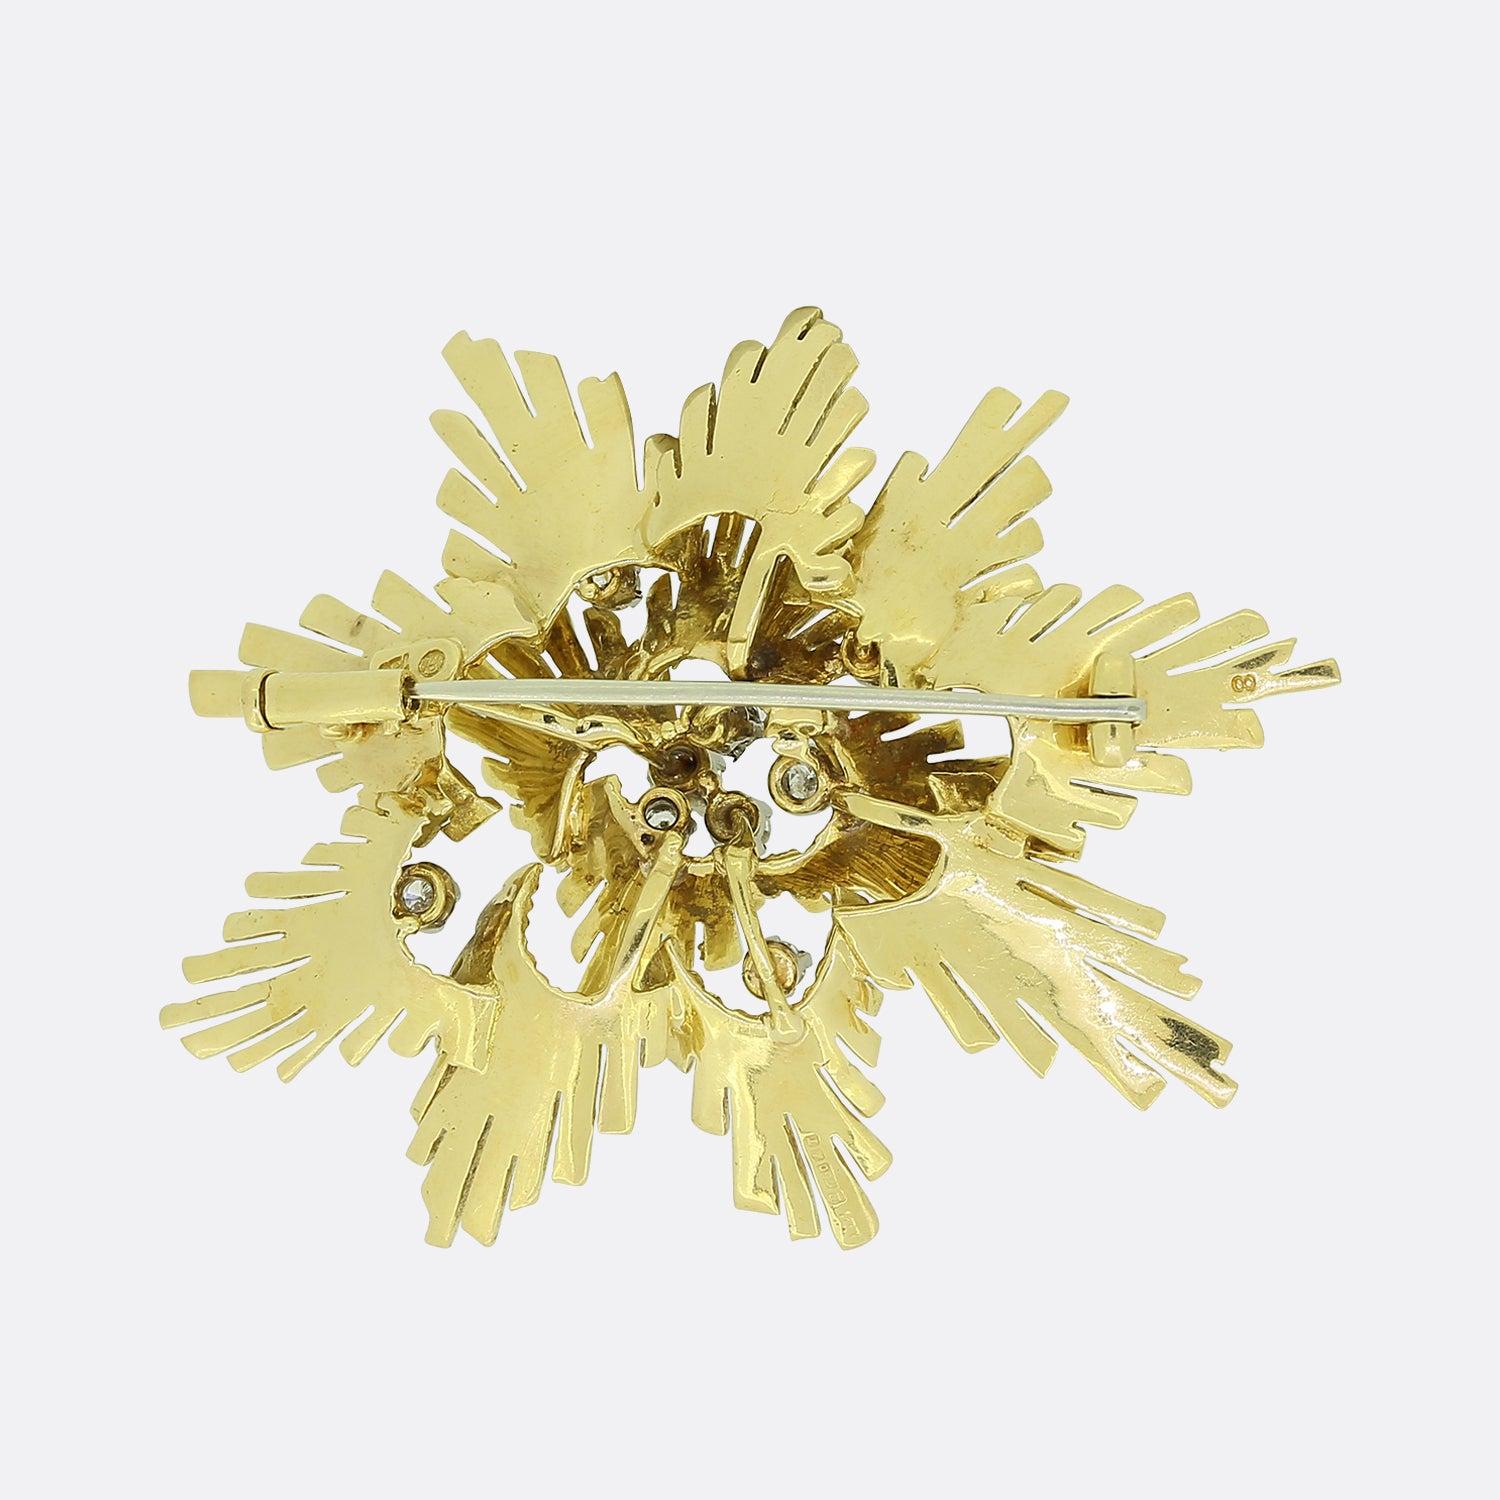 This is a vintage 18ct yellow gold diamond brooch. It features a lovely textured design with diamonds set sporadically around the 3D gold model. The brooch is crafted in a typical 1980s style but it has an import hallmark which appears to be dated